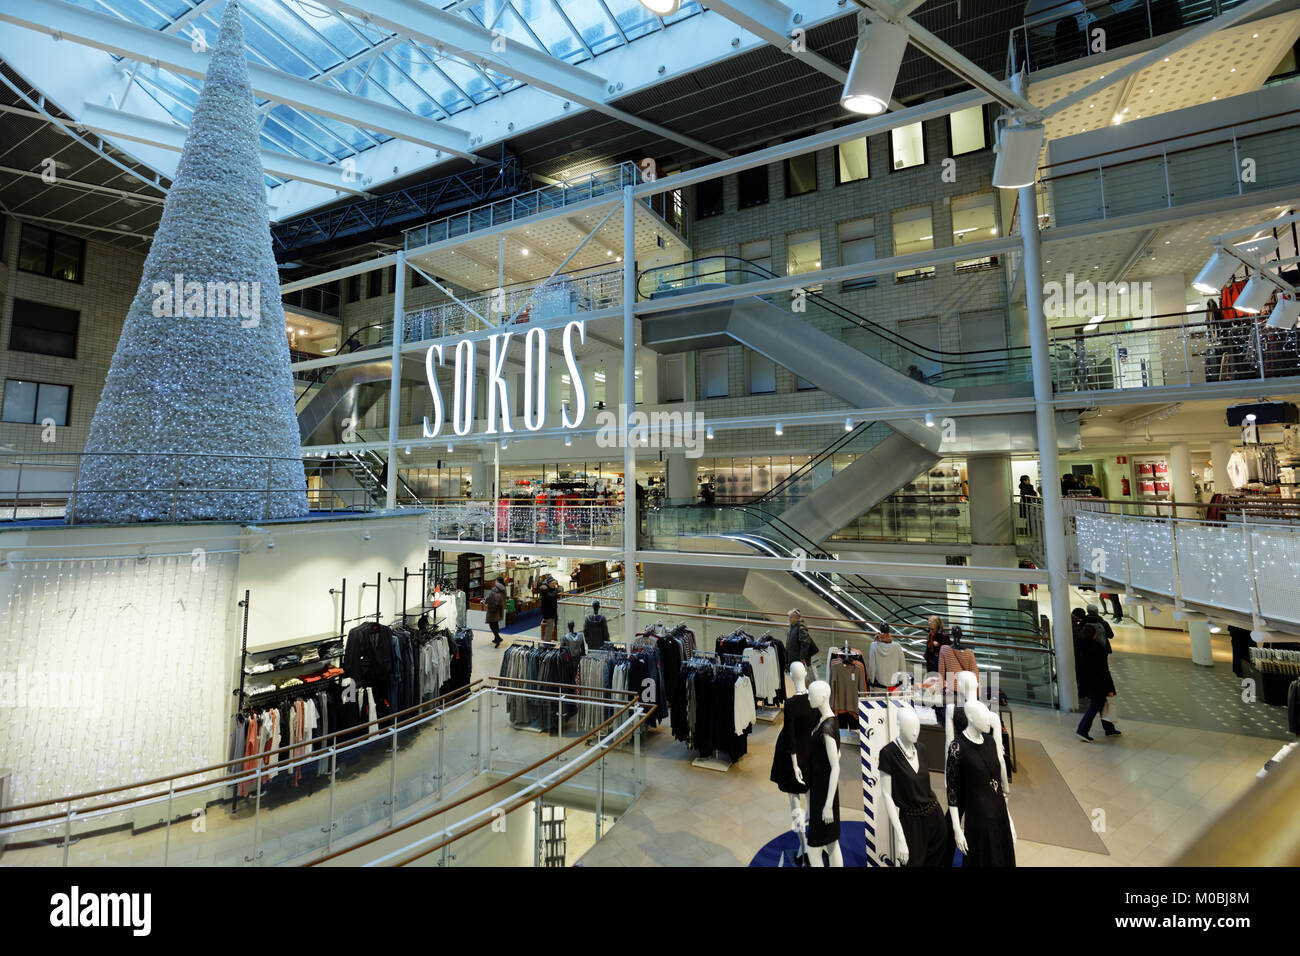 Helsinki, Finland - November 26, 2016: People in the central department store Sokos decorated for Christmas. Sokos is a chain of department stores in  Stock Photo